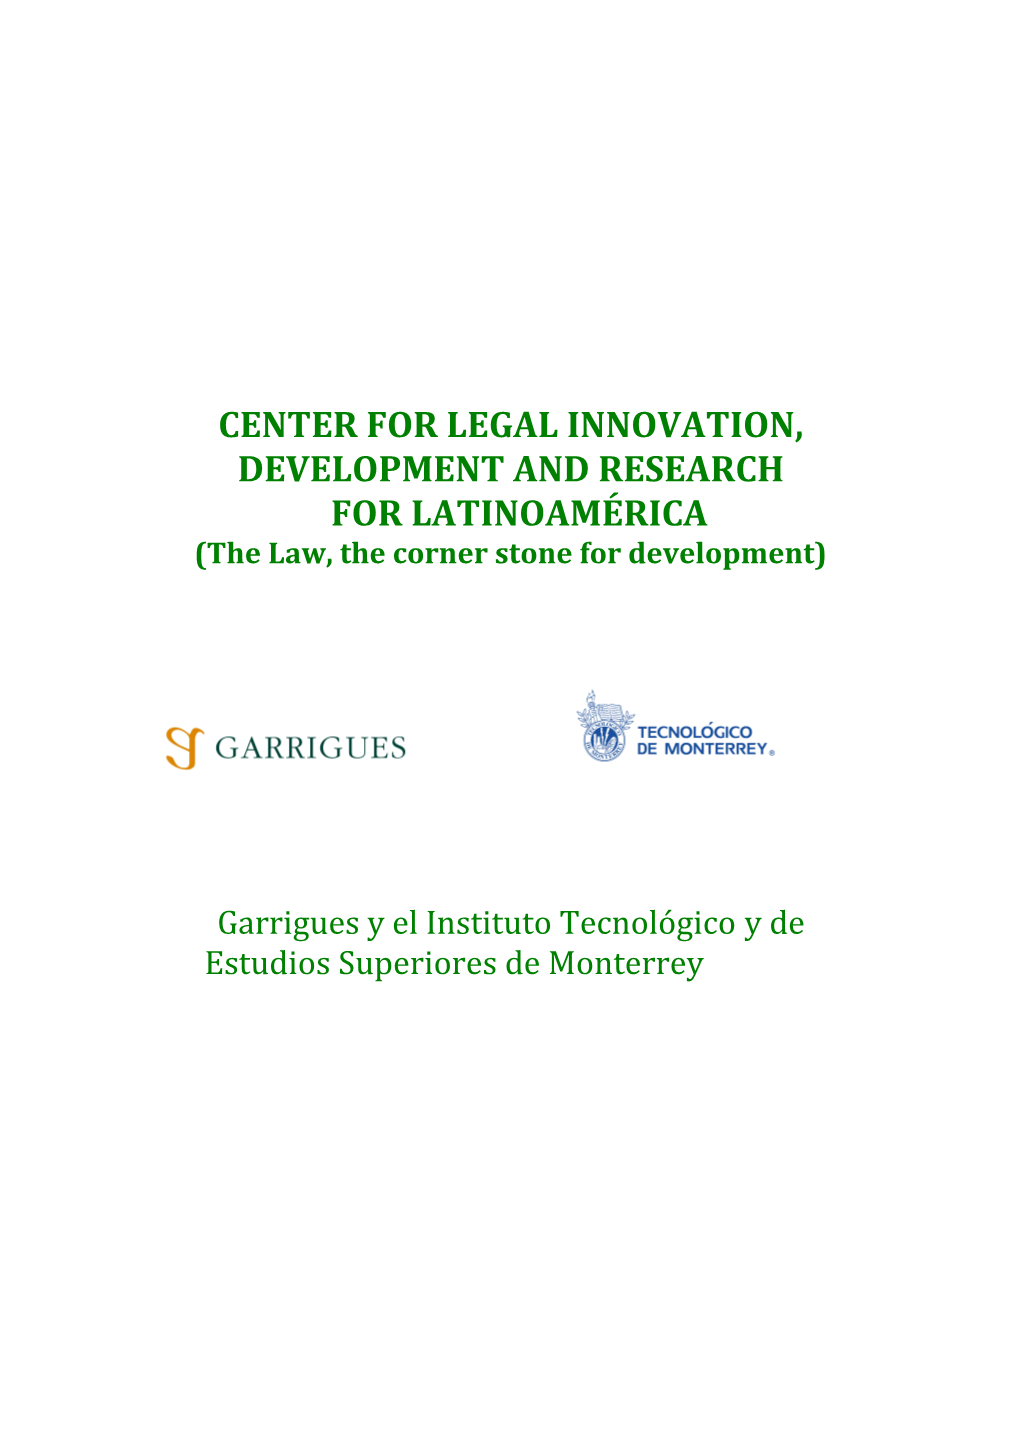 Center for Legal Innovation, Development and Research for Latinoamerica